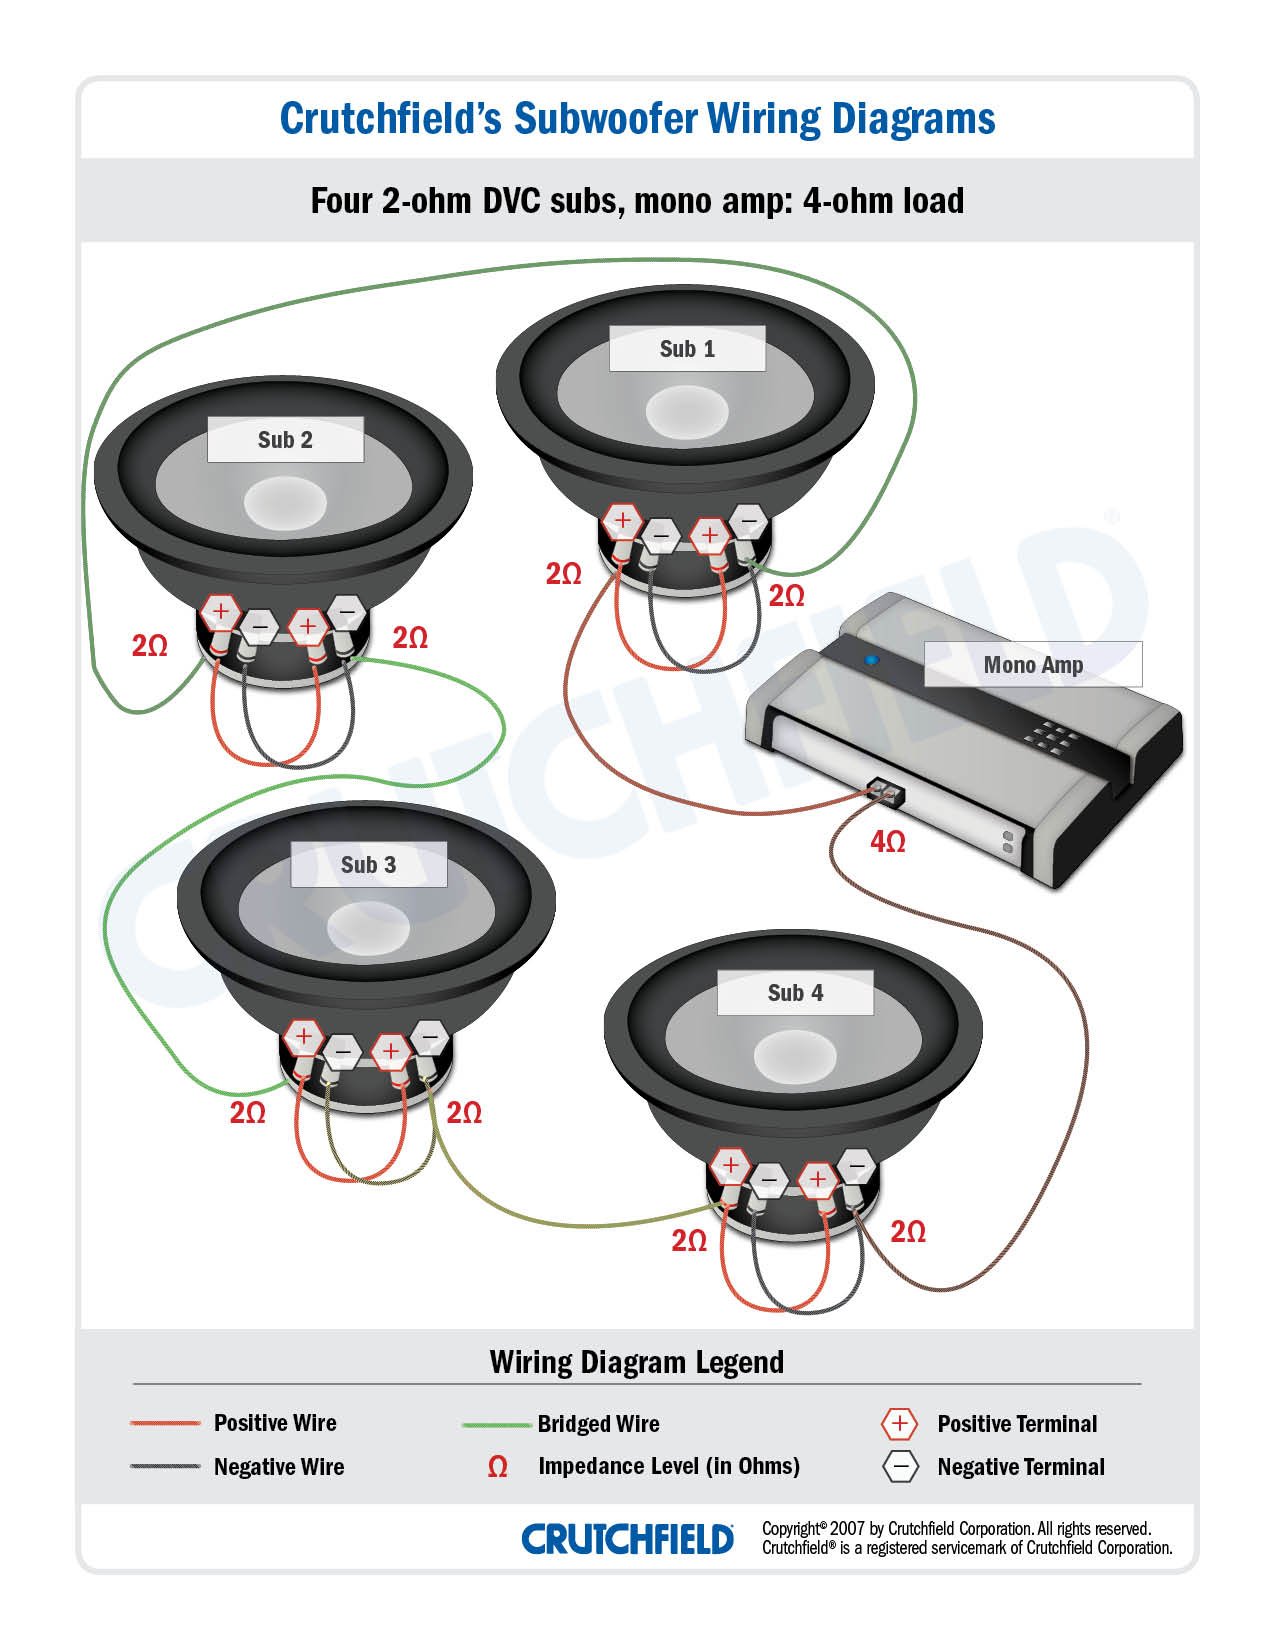 Wiring 3 single voice coil 4 ohm subs